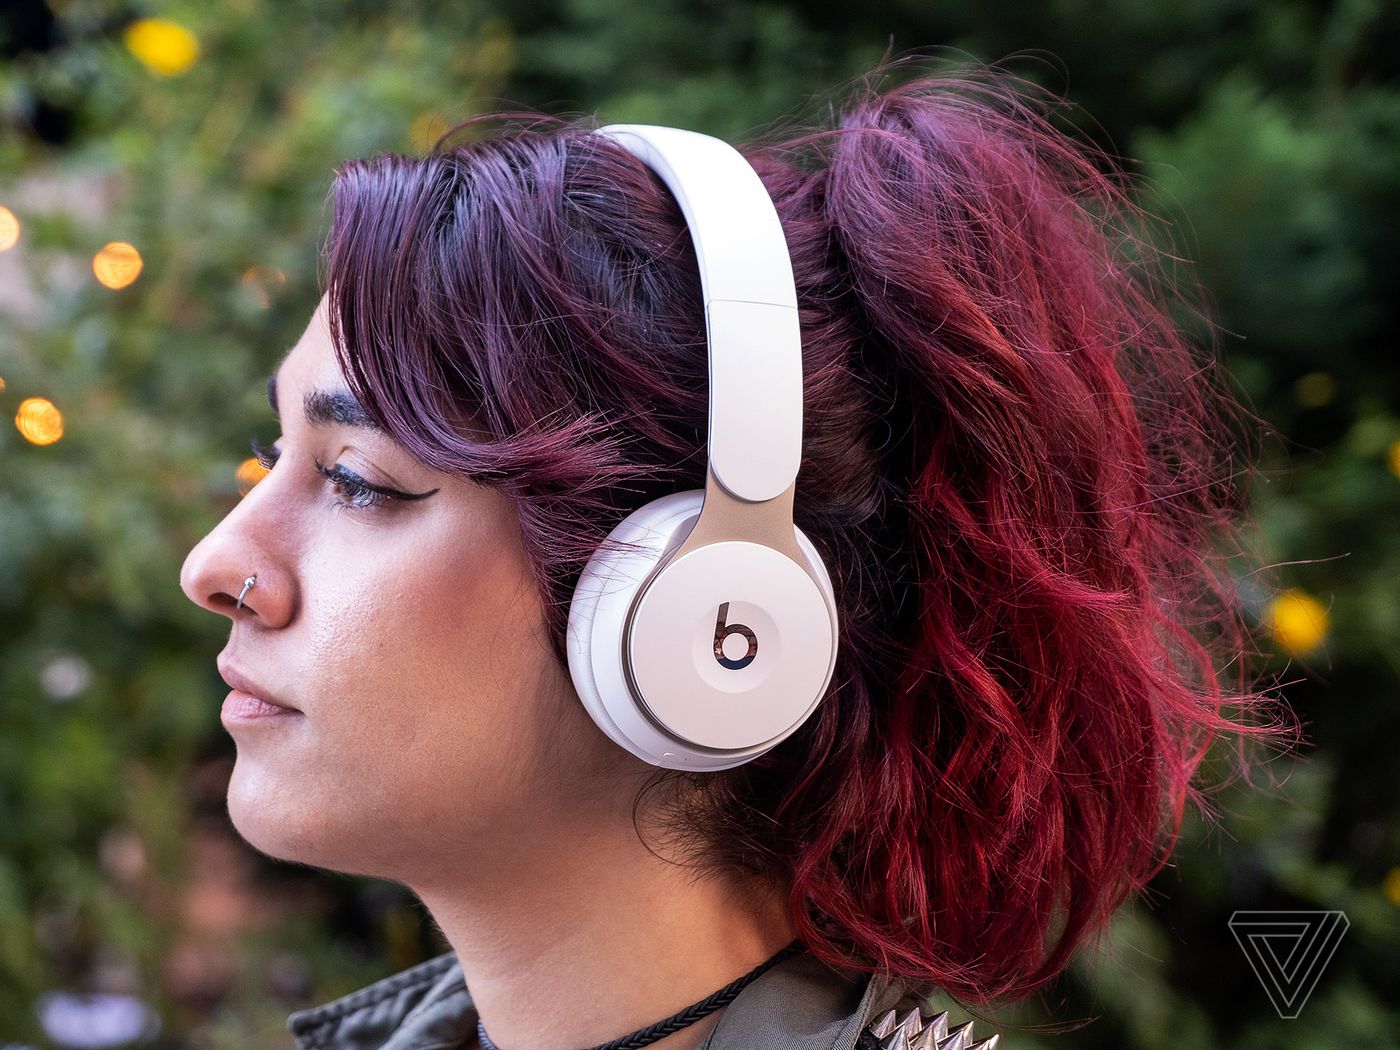 Beats Solo Pro review: beat the noise - The Verge